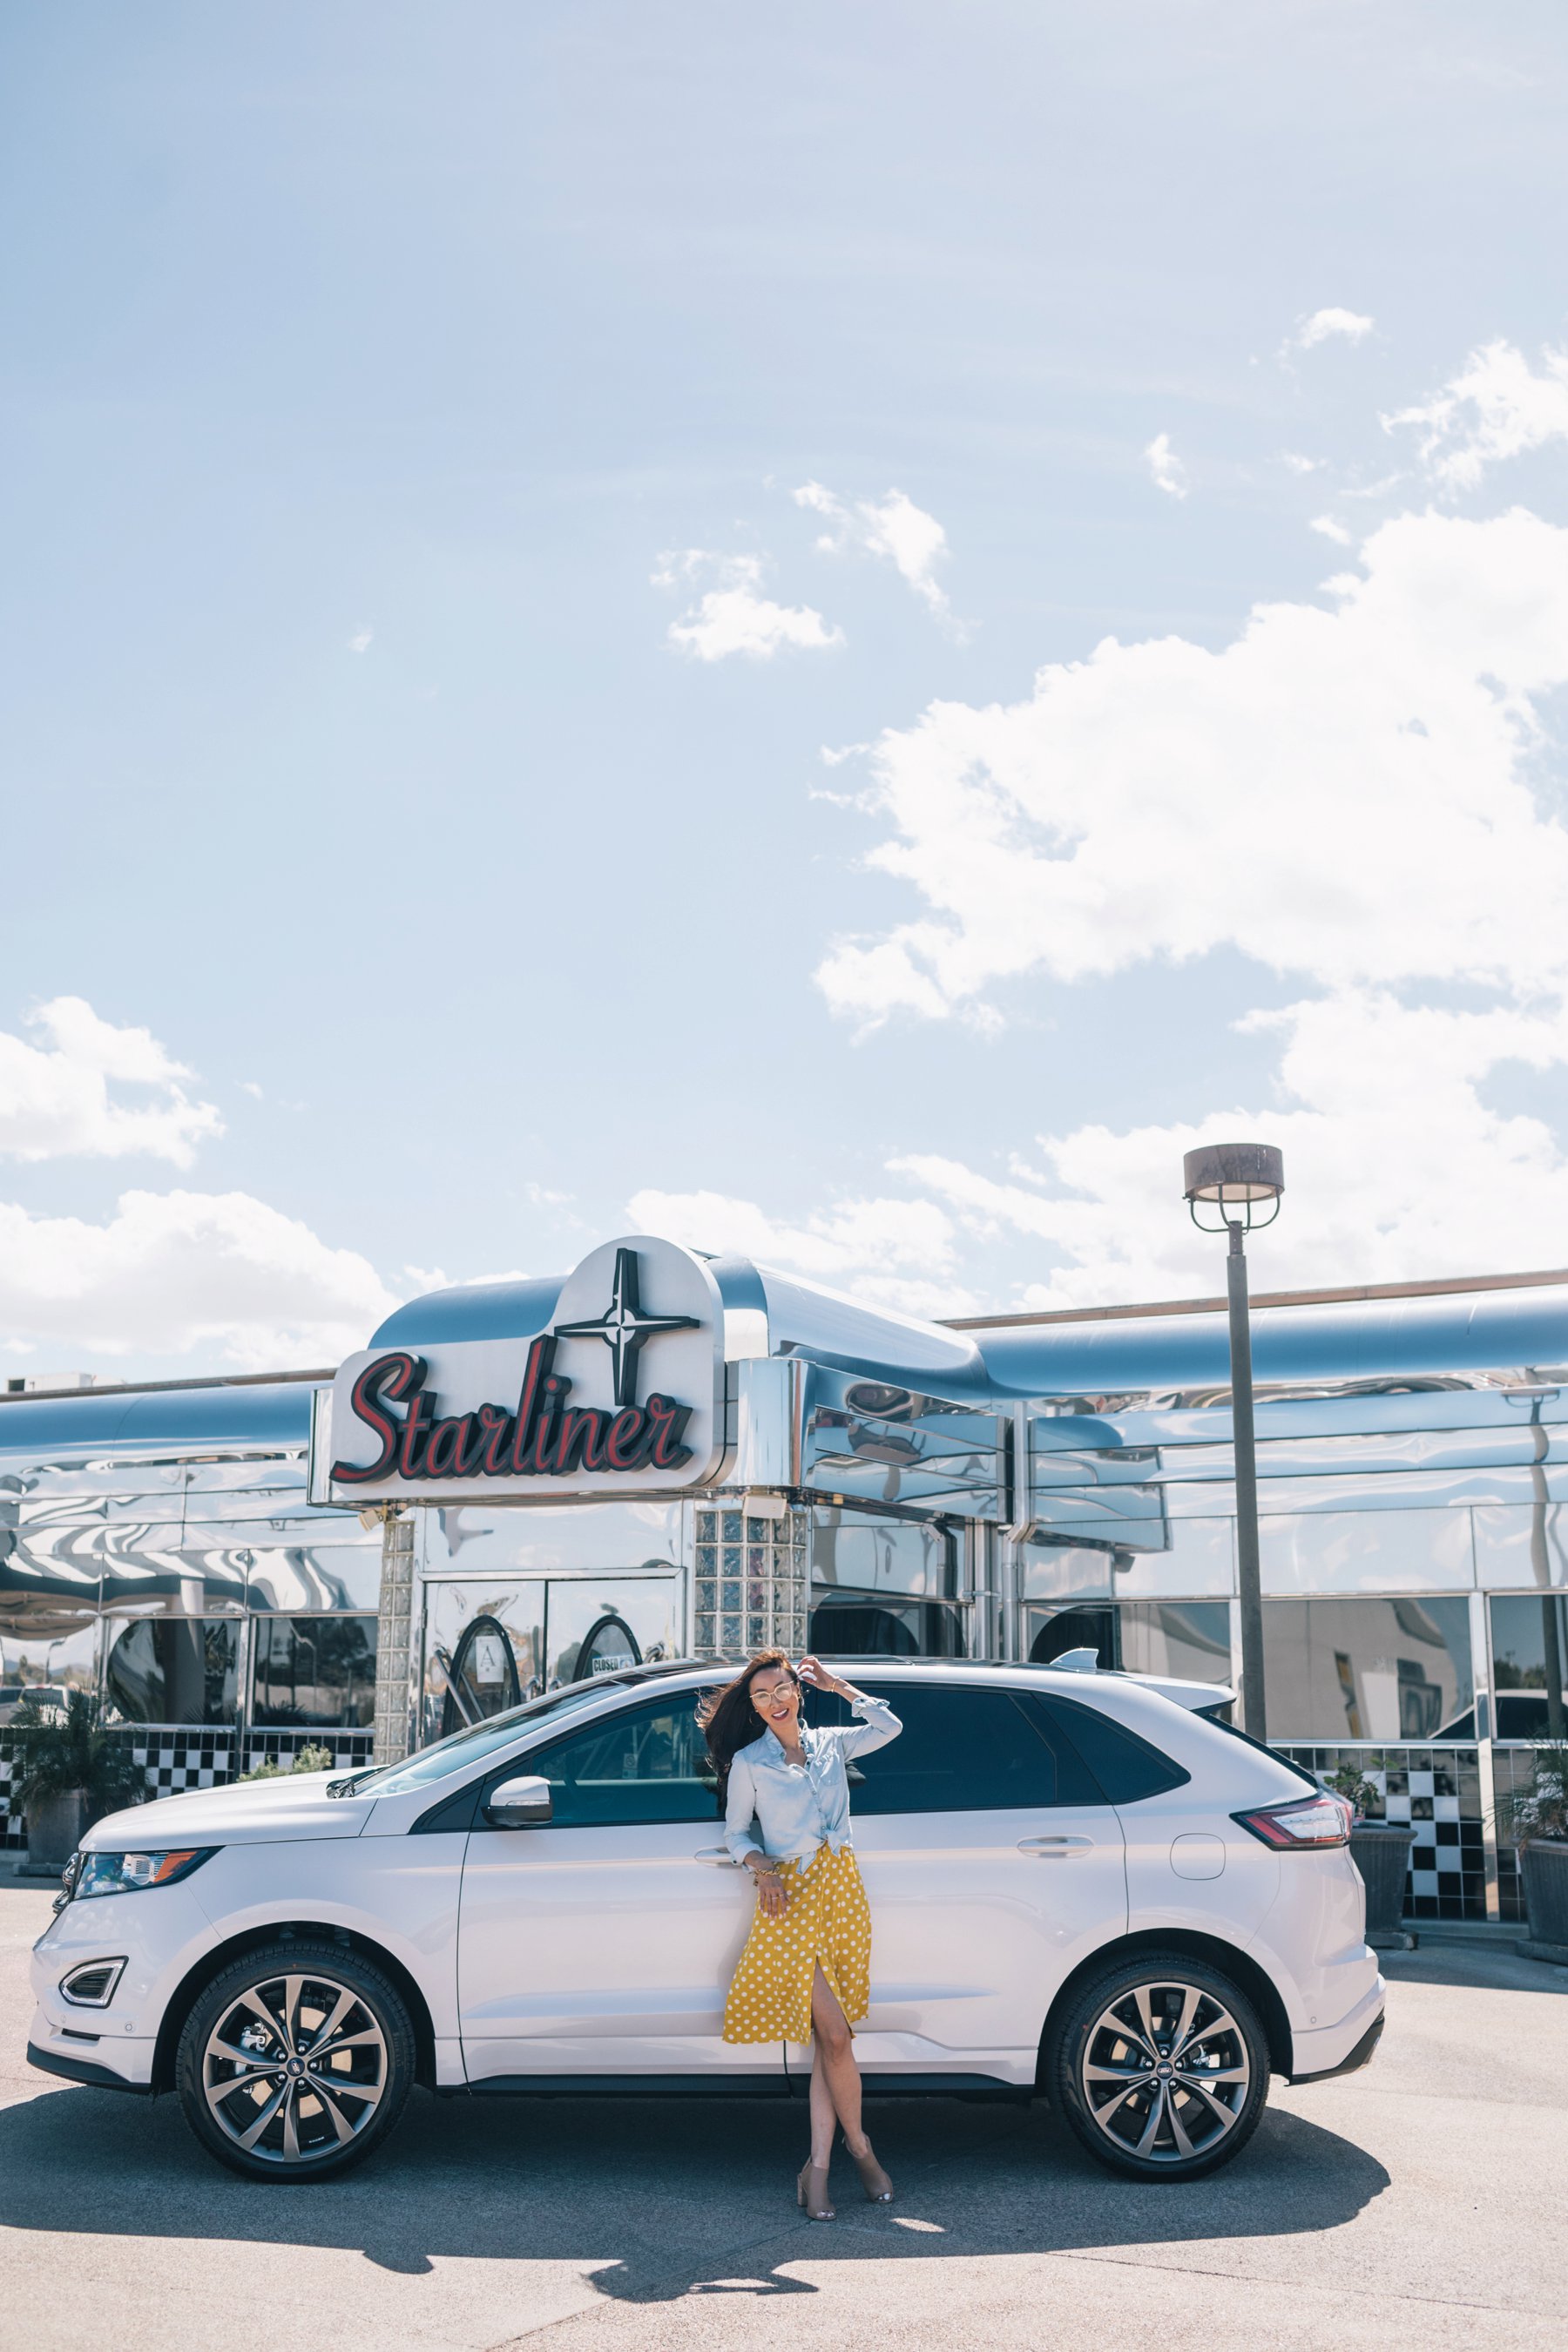 Ford Edge review with Sanderson Ford, lifestyle blogger Diana Elizabeth posing with a car